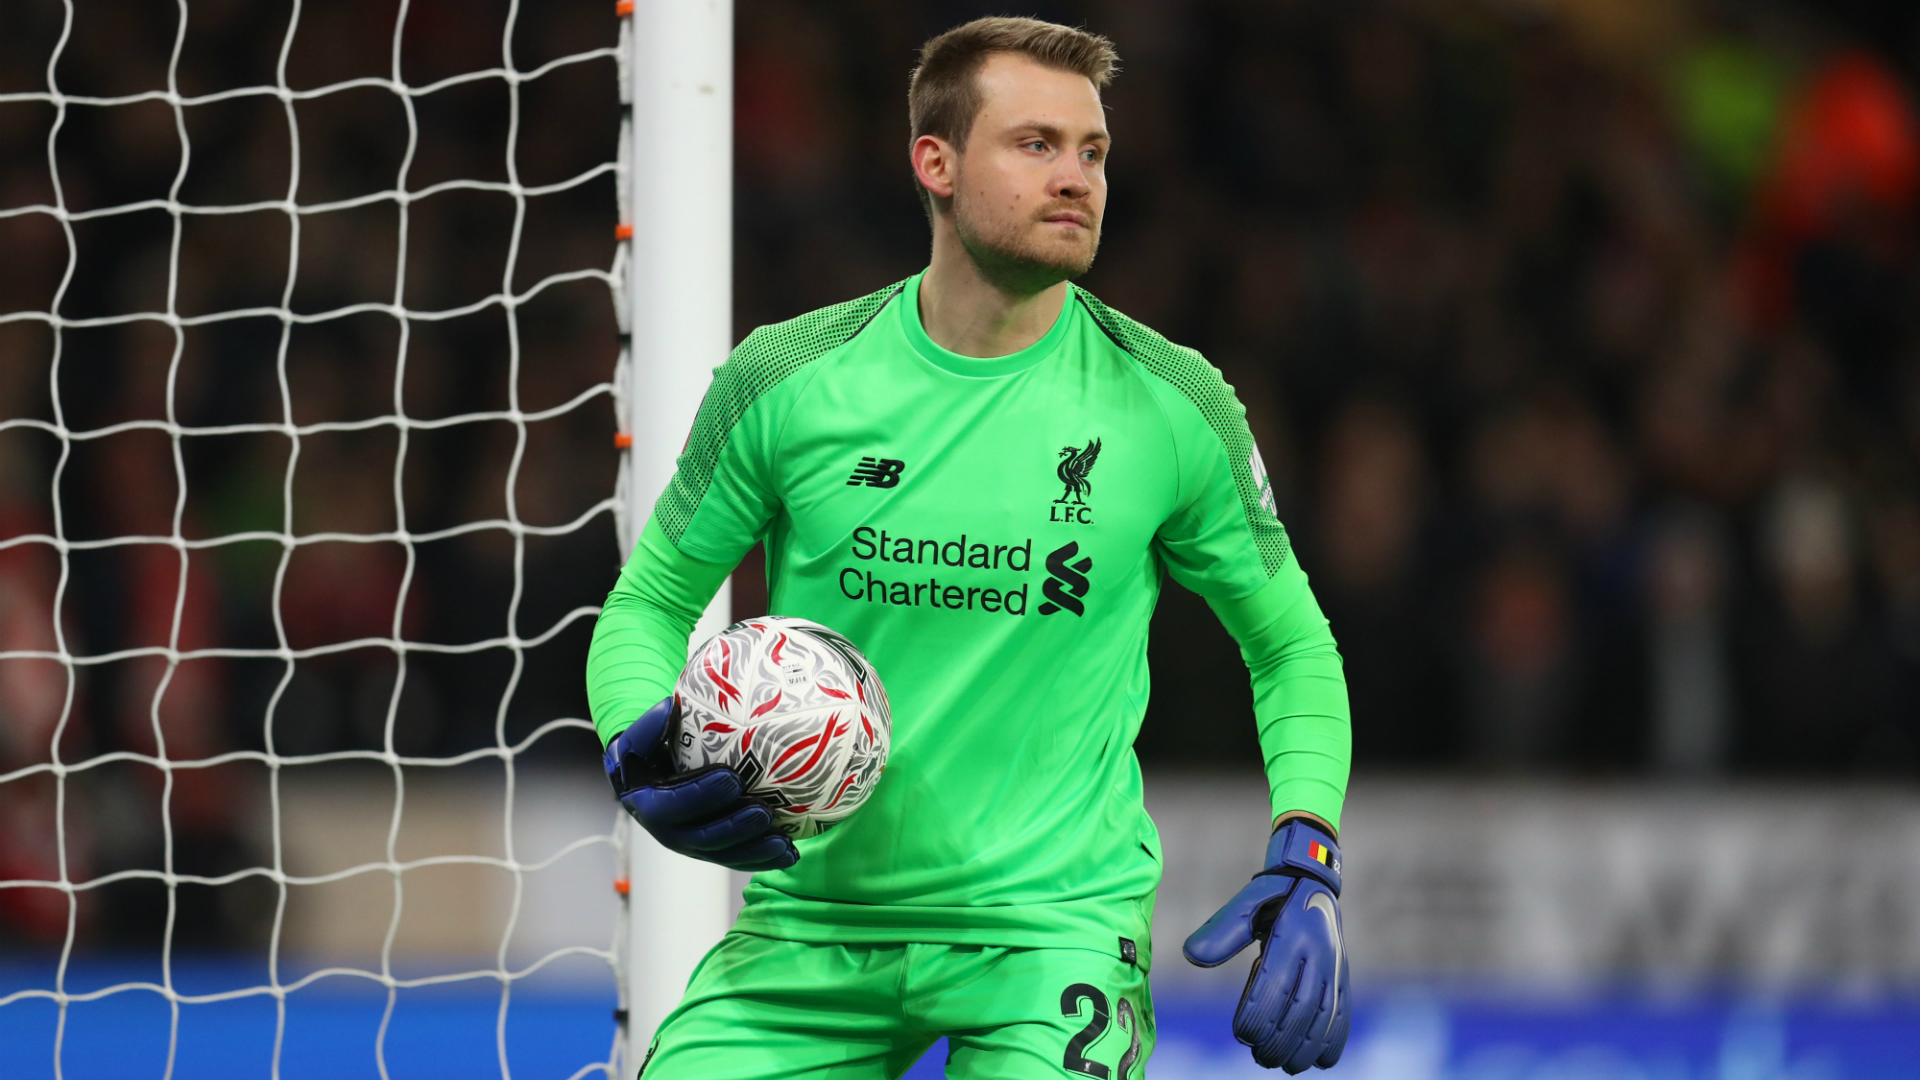 Mignolet leaves Liverpool for Club Brugge in £8.2m deal